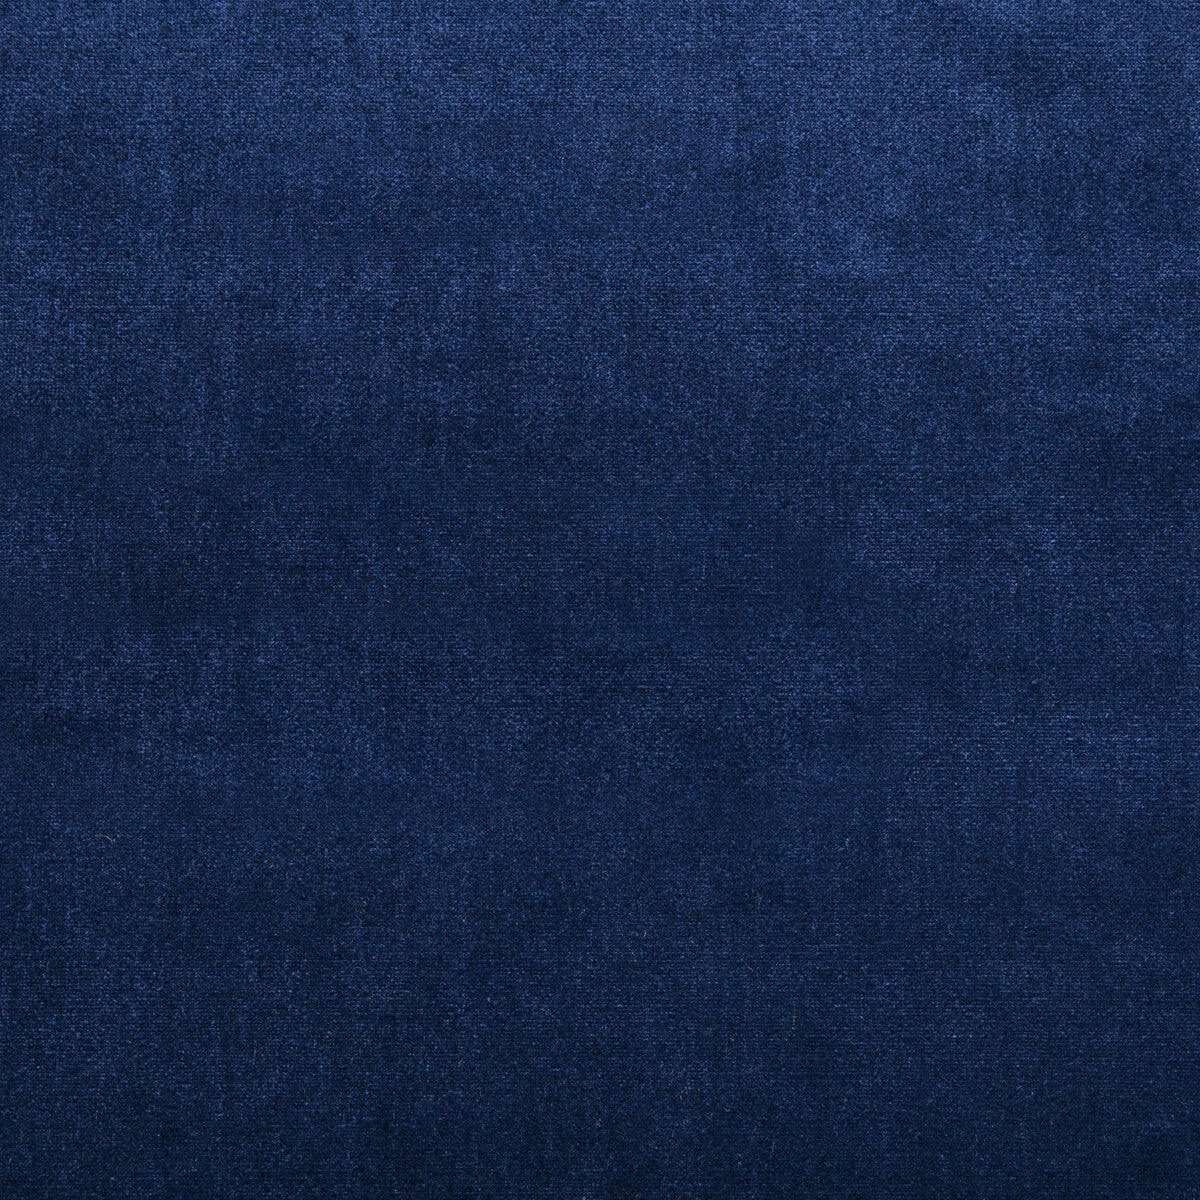 Duchess Velvet fabric in navy color - pattern 2016121.55.0 - by Lee Jofa